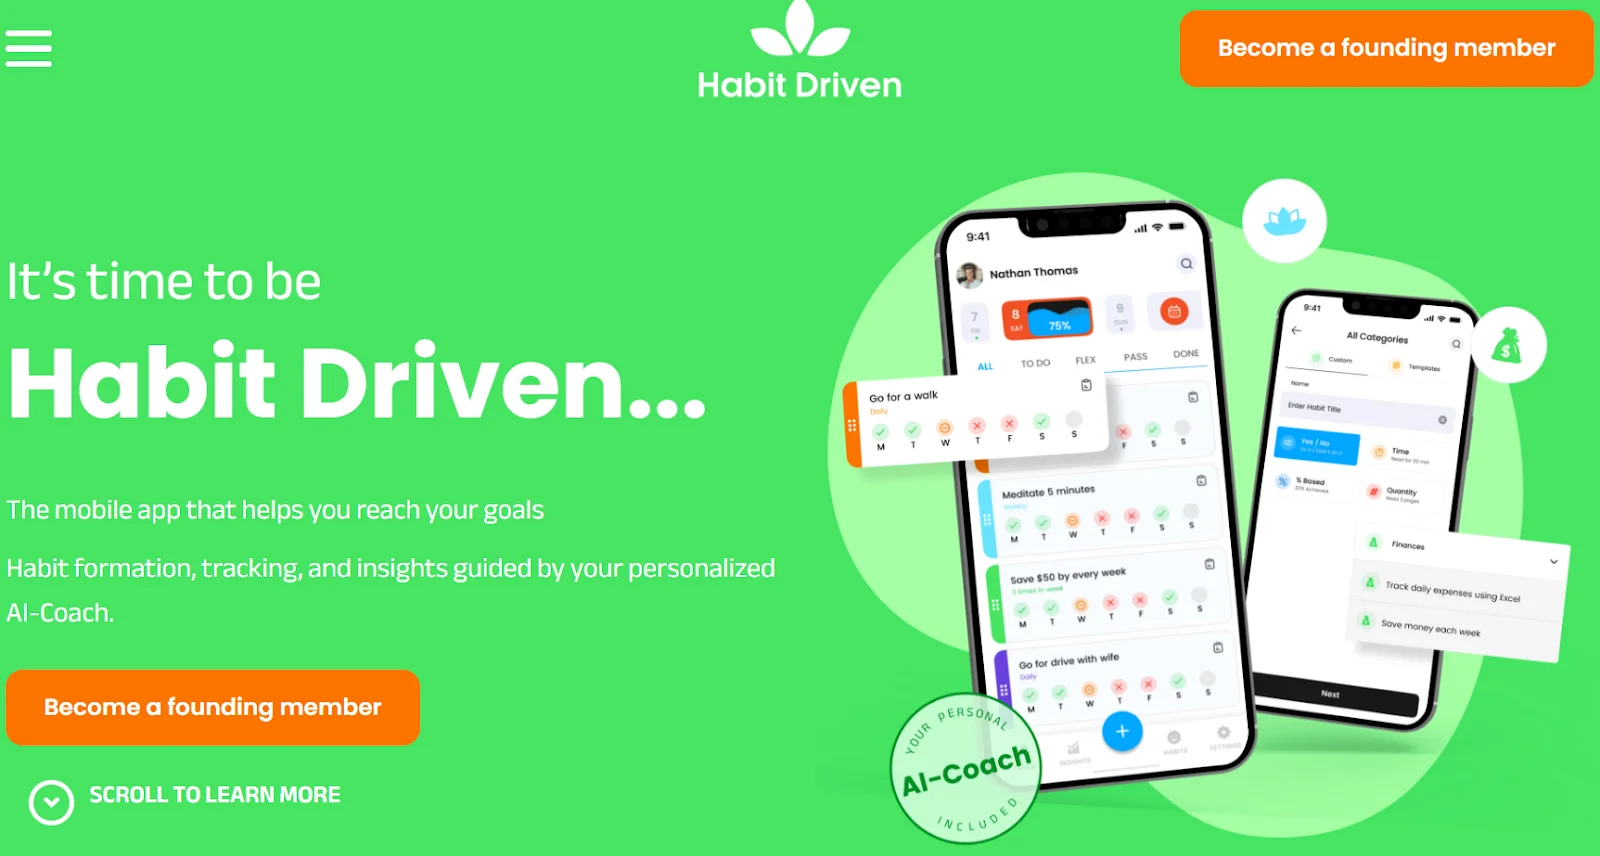 Habit Driven Website - The mobile app that helps you reach your goals